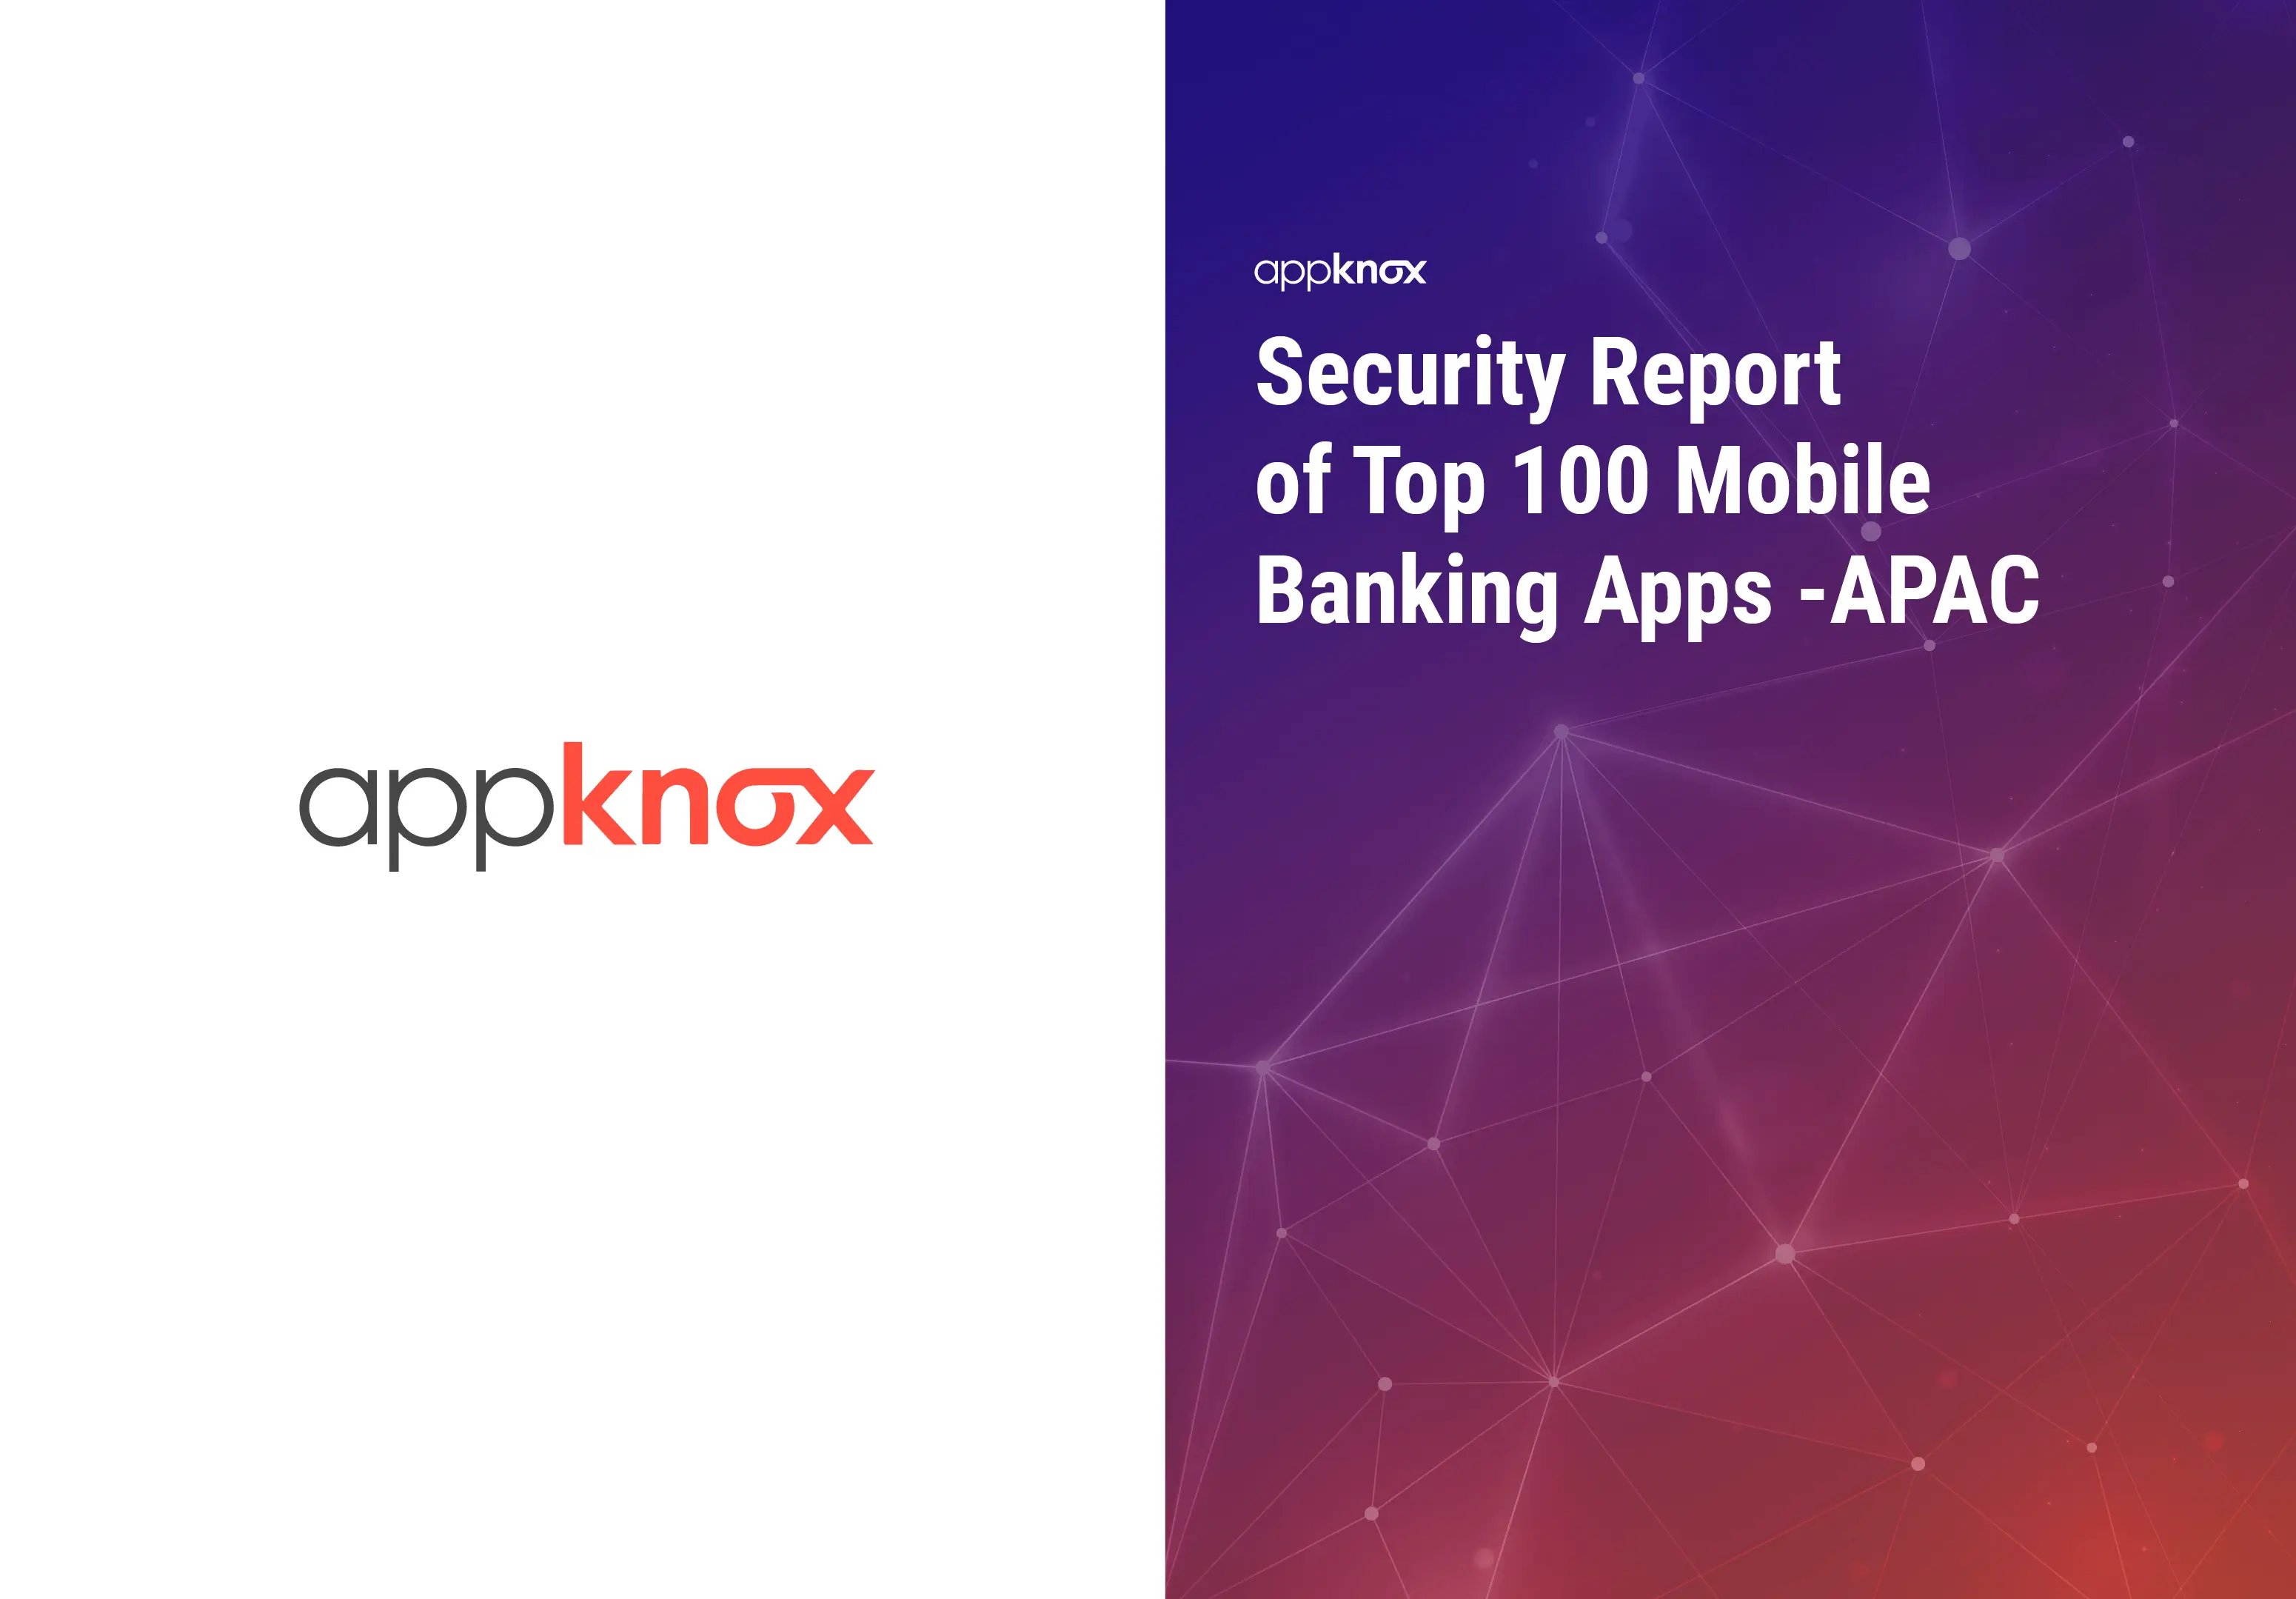 REPORTS - Security Report of Top 100 Mobile Banking Apps -APAC